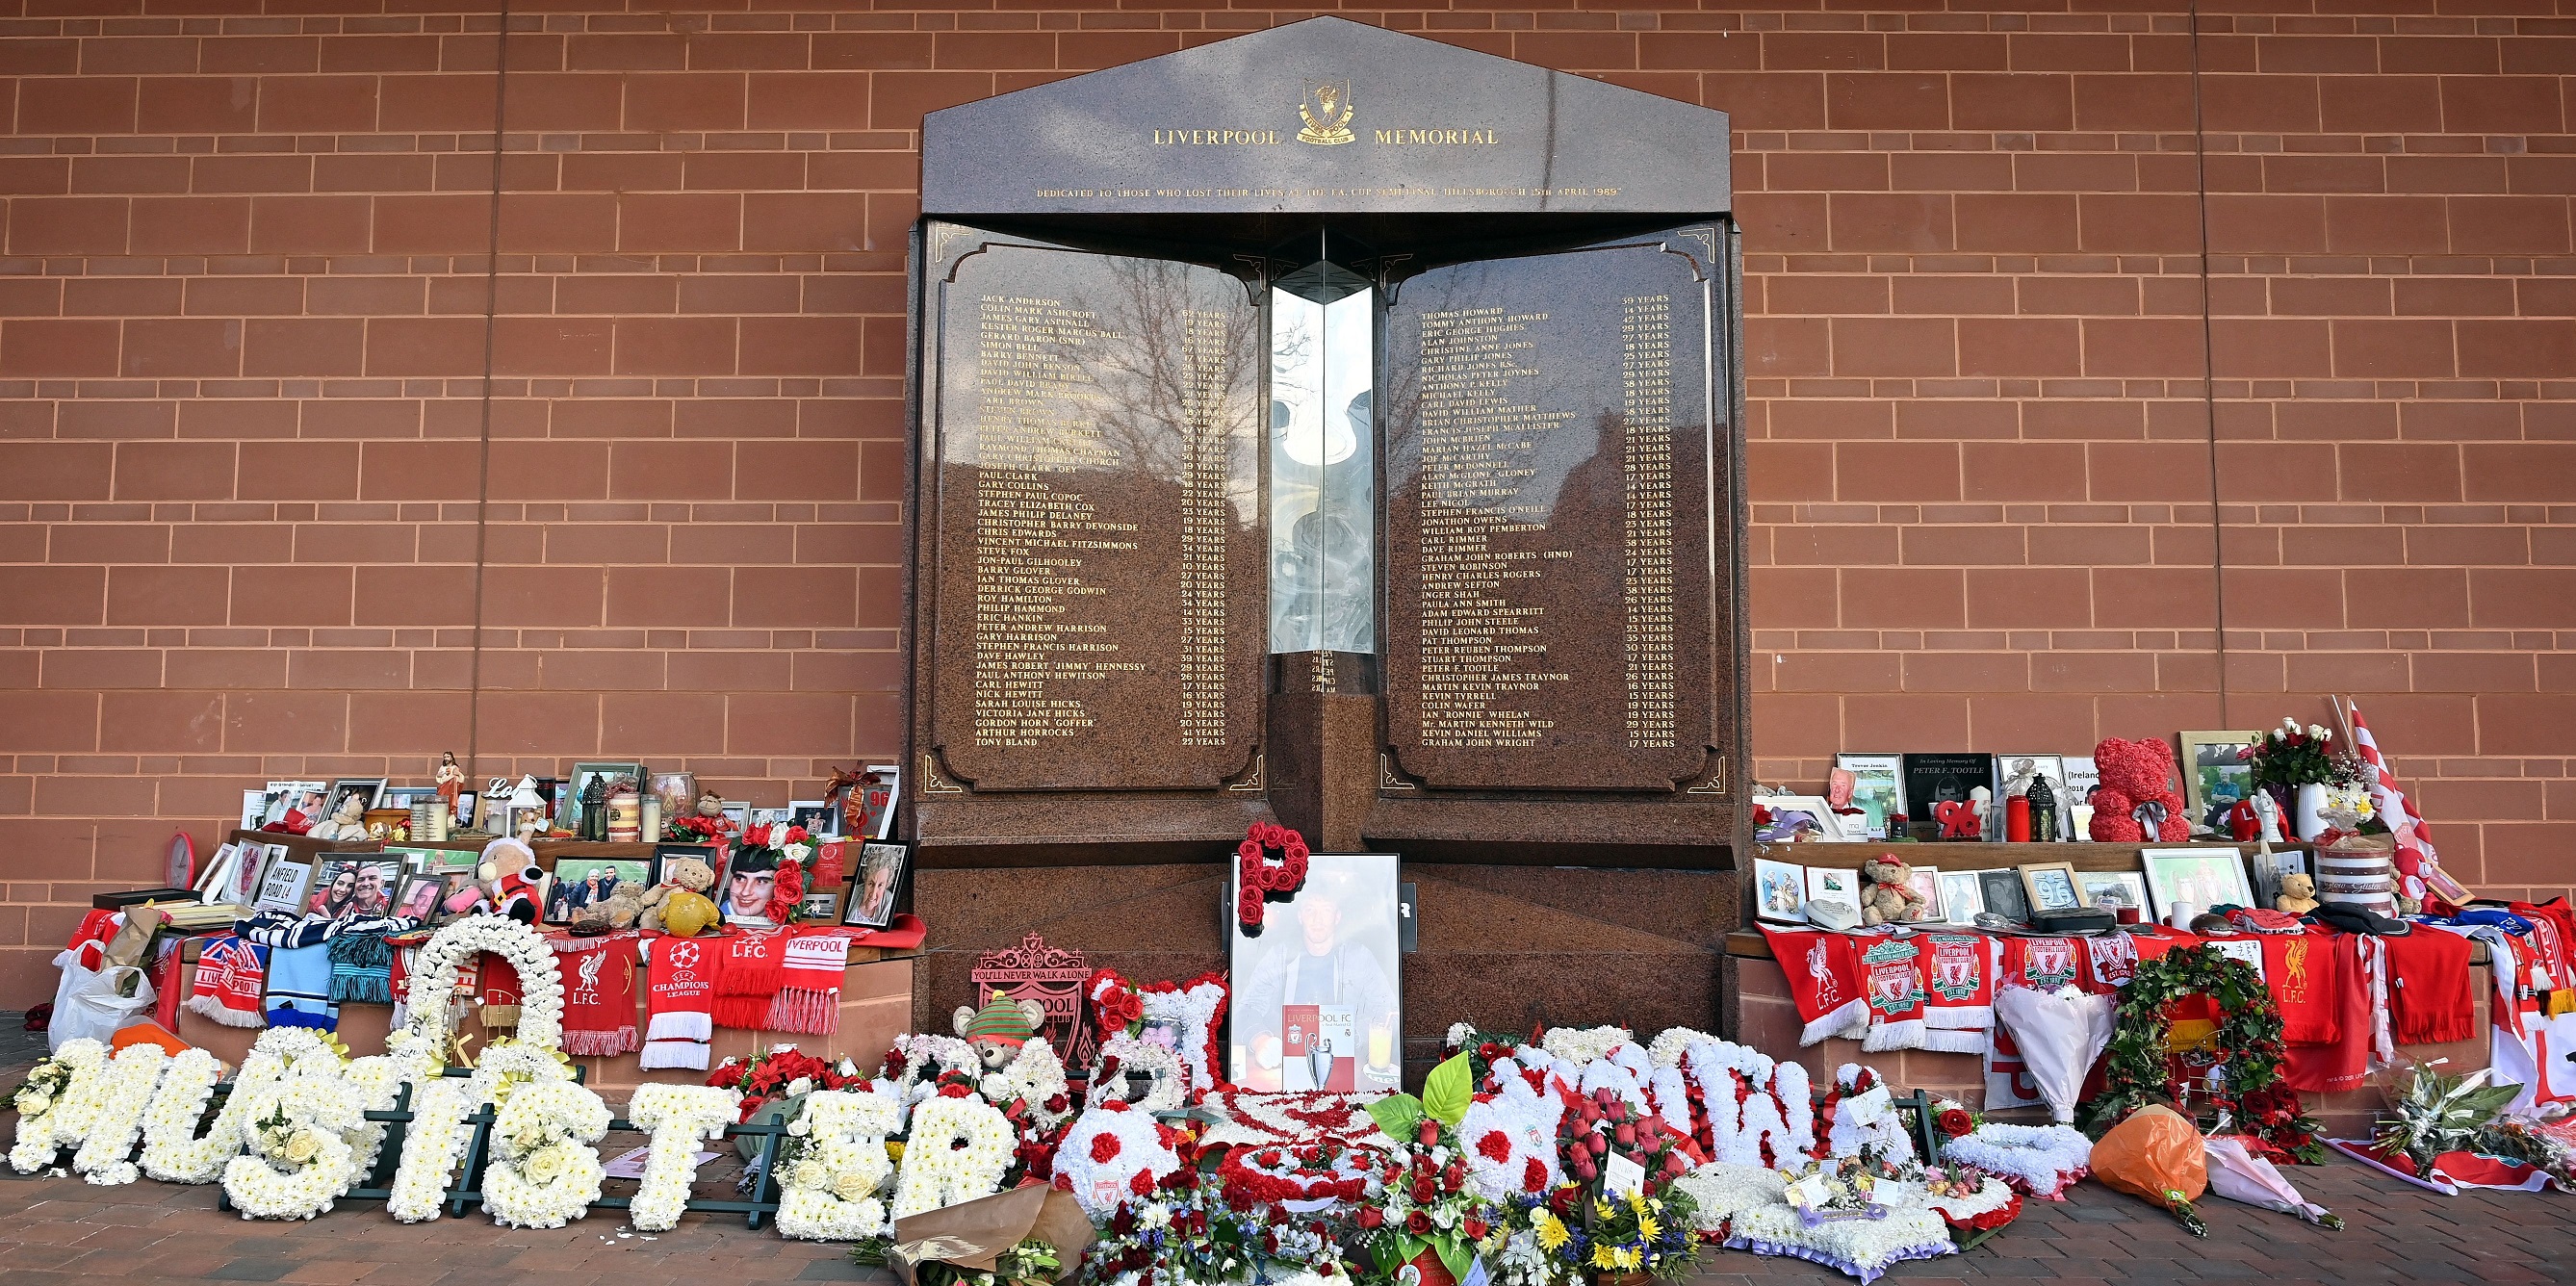 Liverpool release statement responding to continuation of vile Hillsborough chants